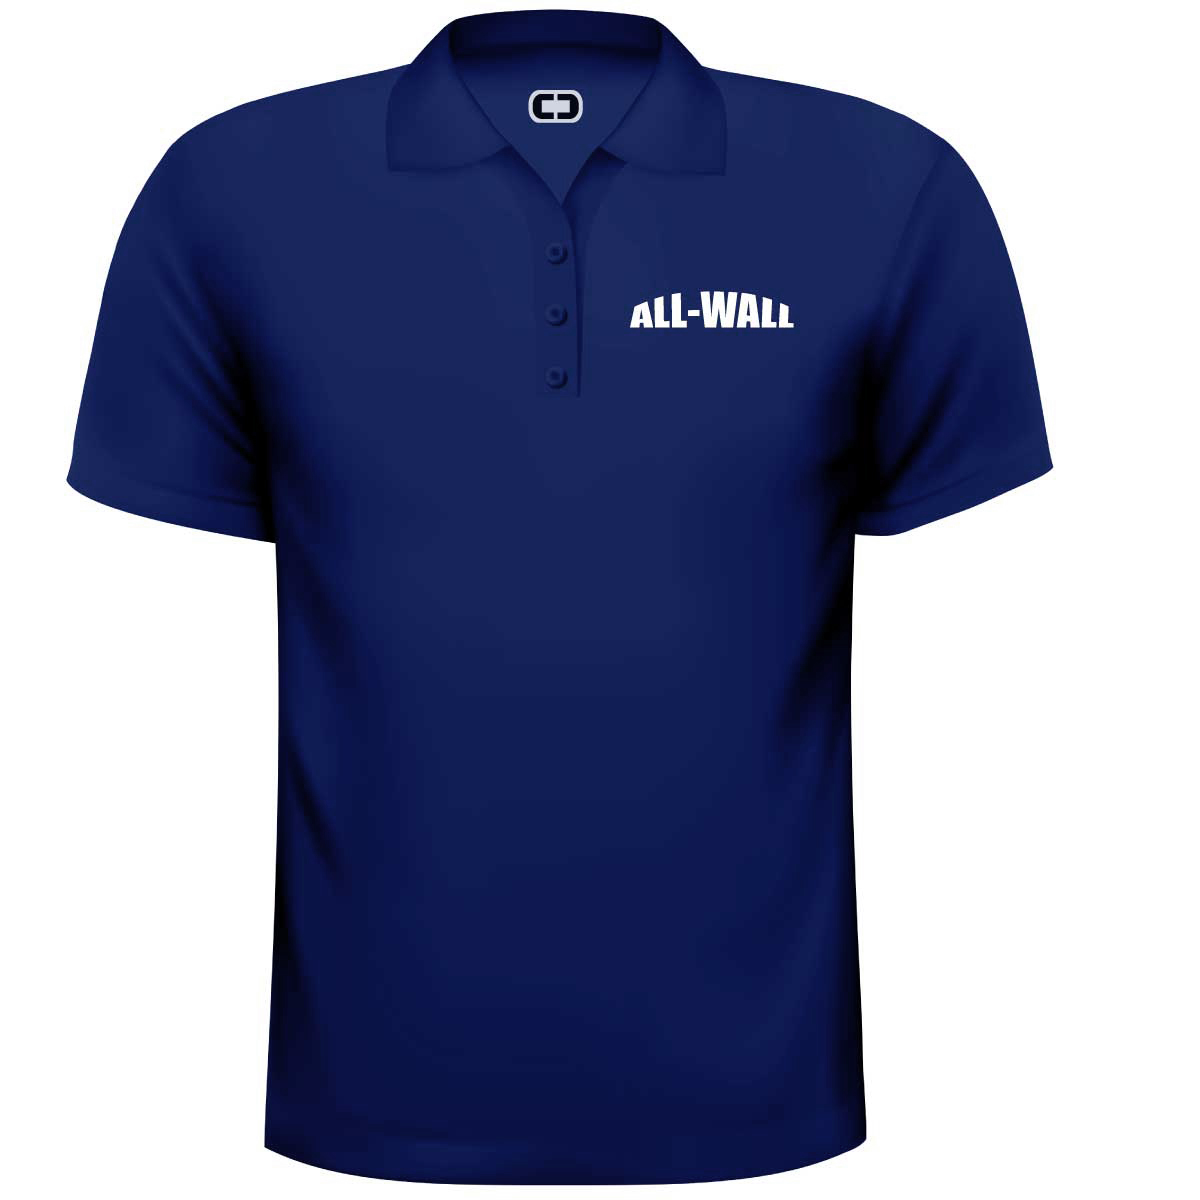 All-Wall Polo XLarge - Navy